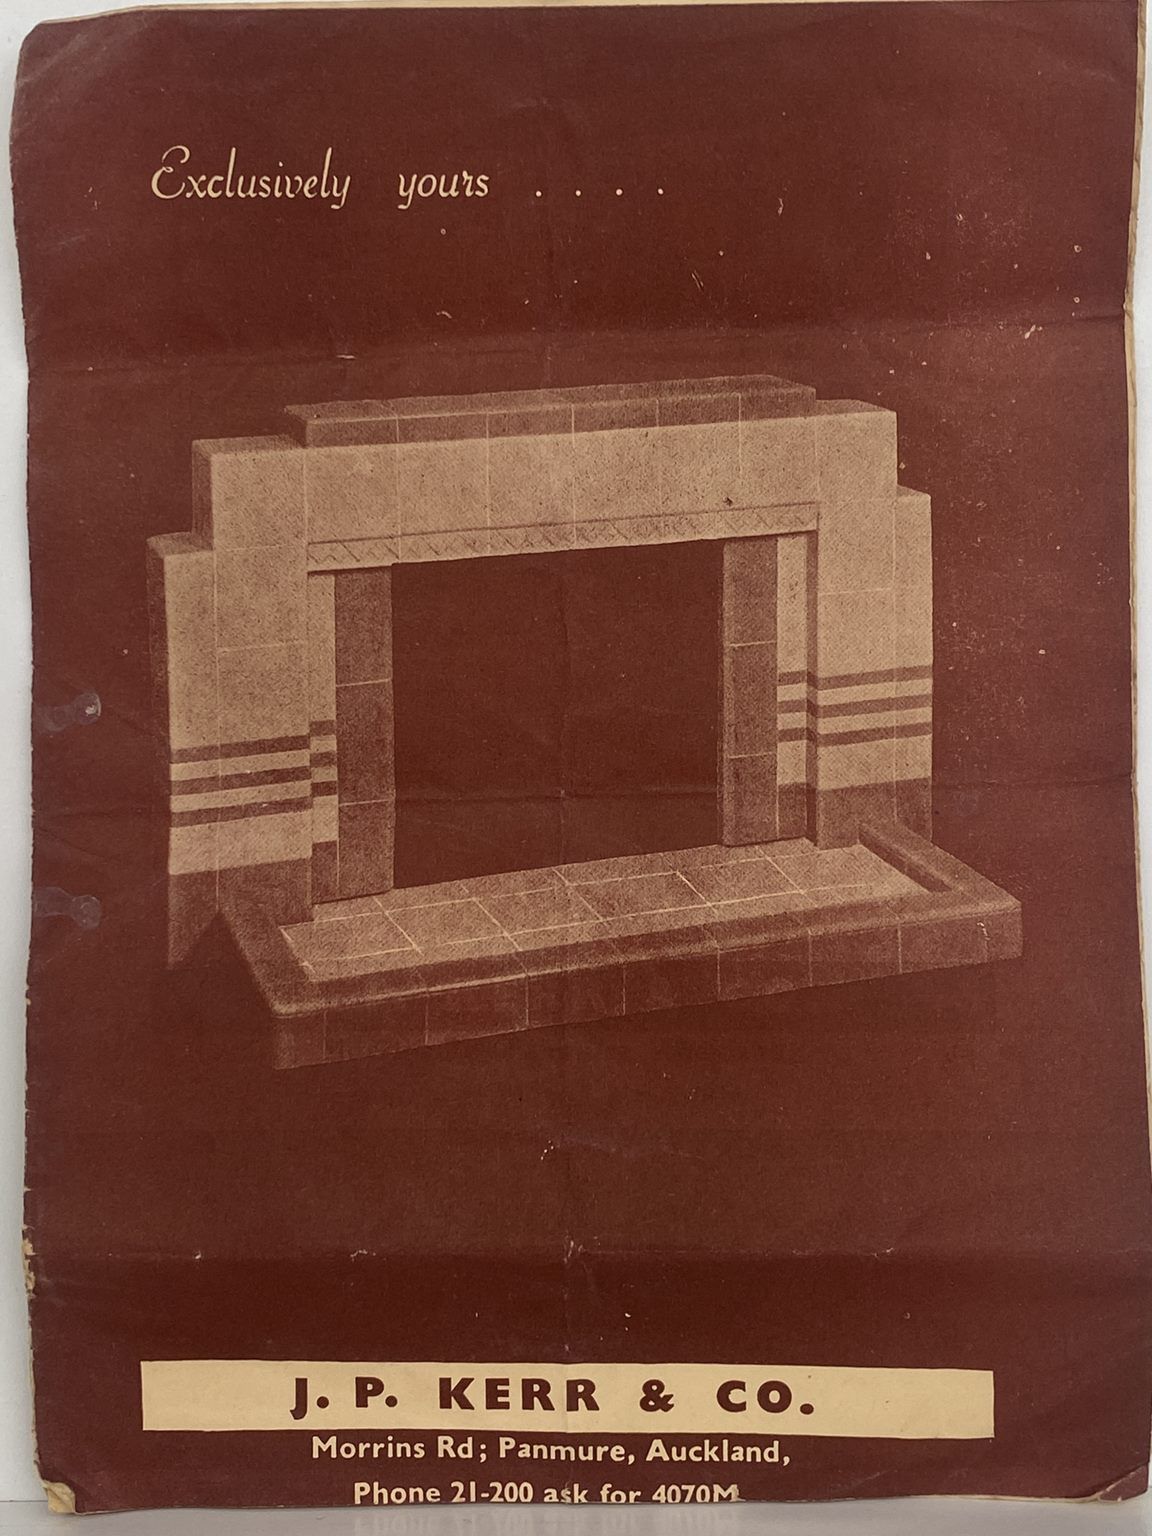 OLD BROCHURE: for fireplace surrounds by J. P. Kerr & Co